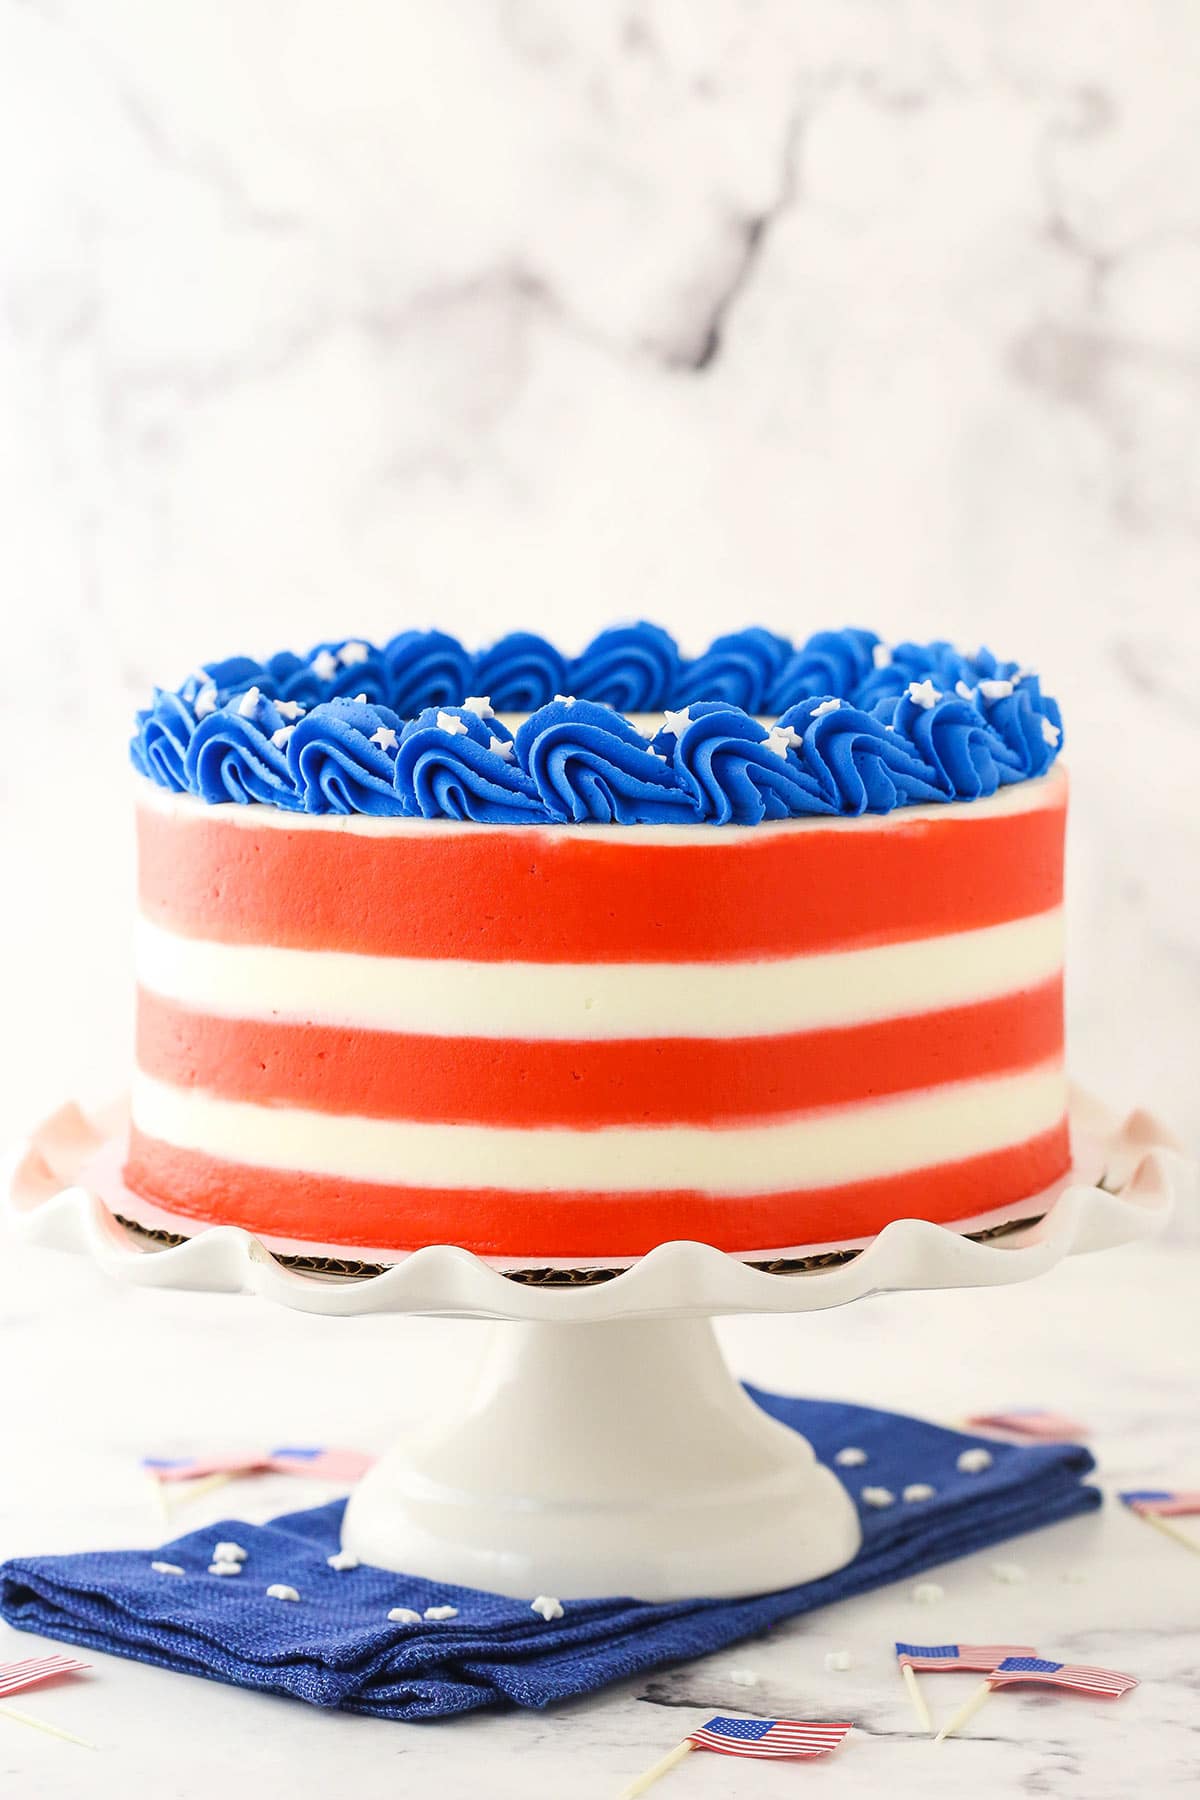 A tall cake stand holding a 4th of July marble cake with small American flag toothpicks on the counter beneath it